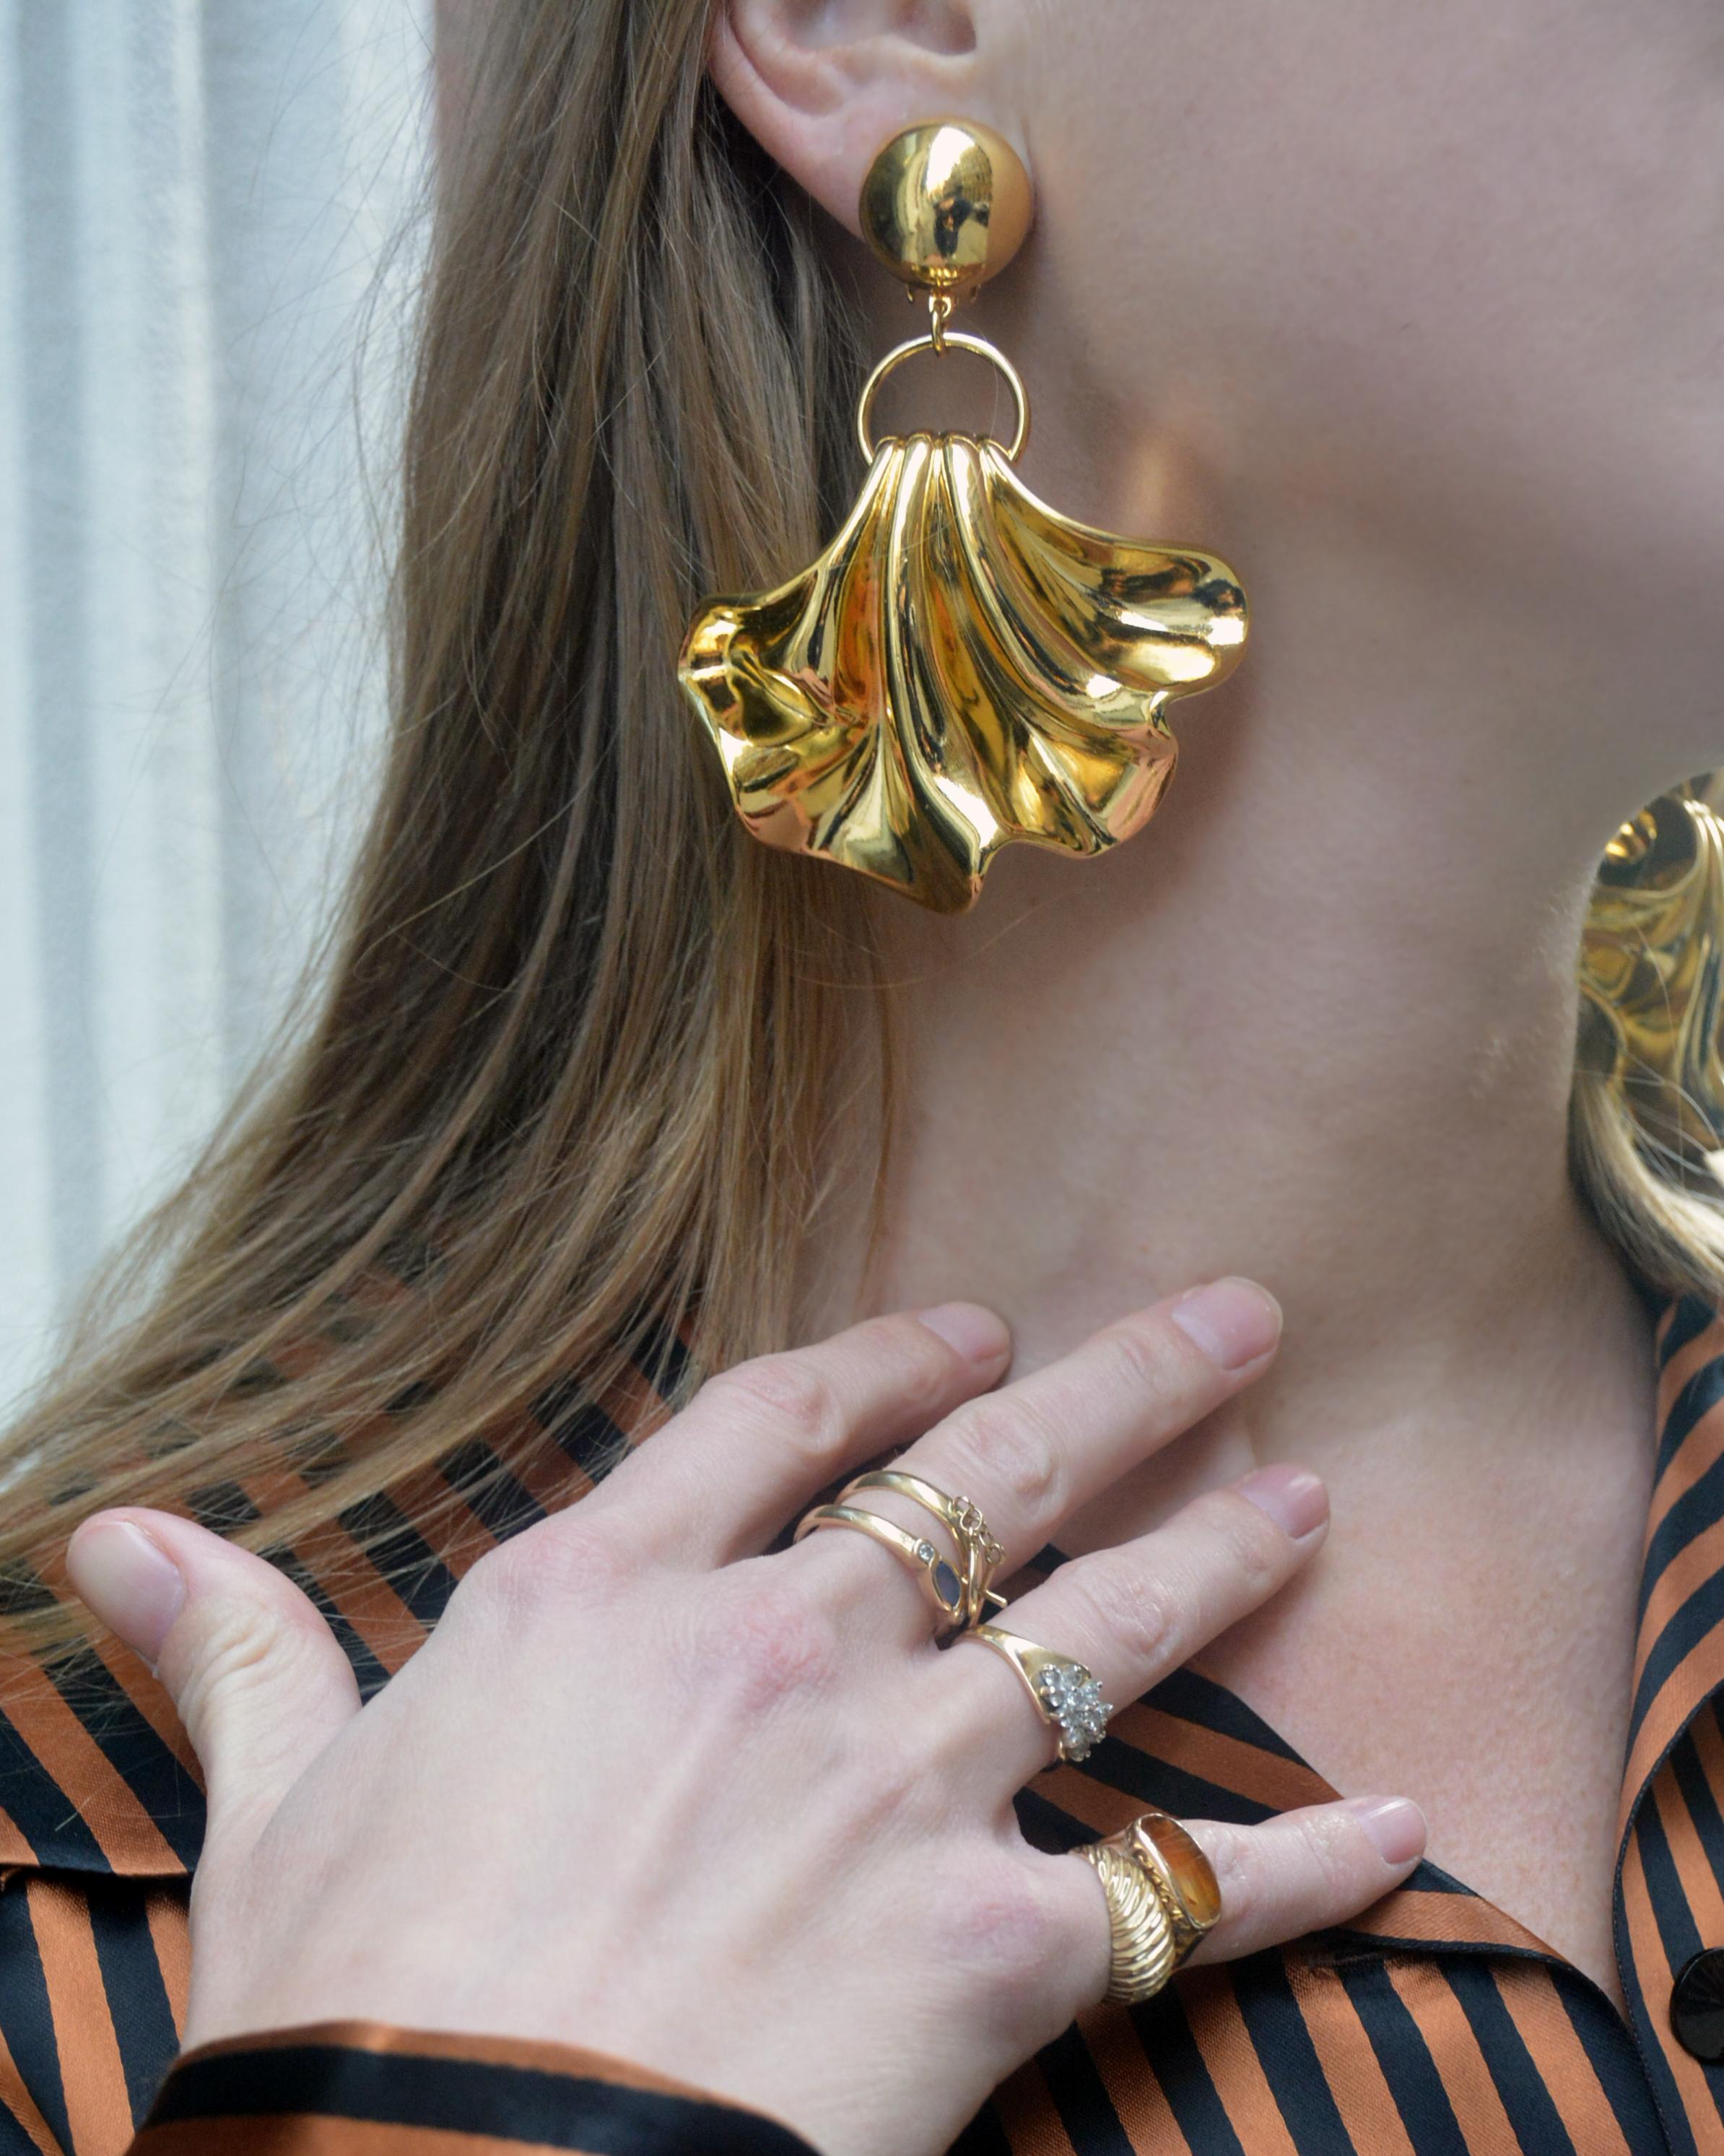 Made in France, these vintage statement earrings are an outfit-defining look. The golden fan-shaped pendant has a wavy, organic shape to it, with lots of movement as it swings freely from the drop ring. What's almost hard to believe by just look at